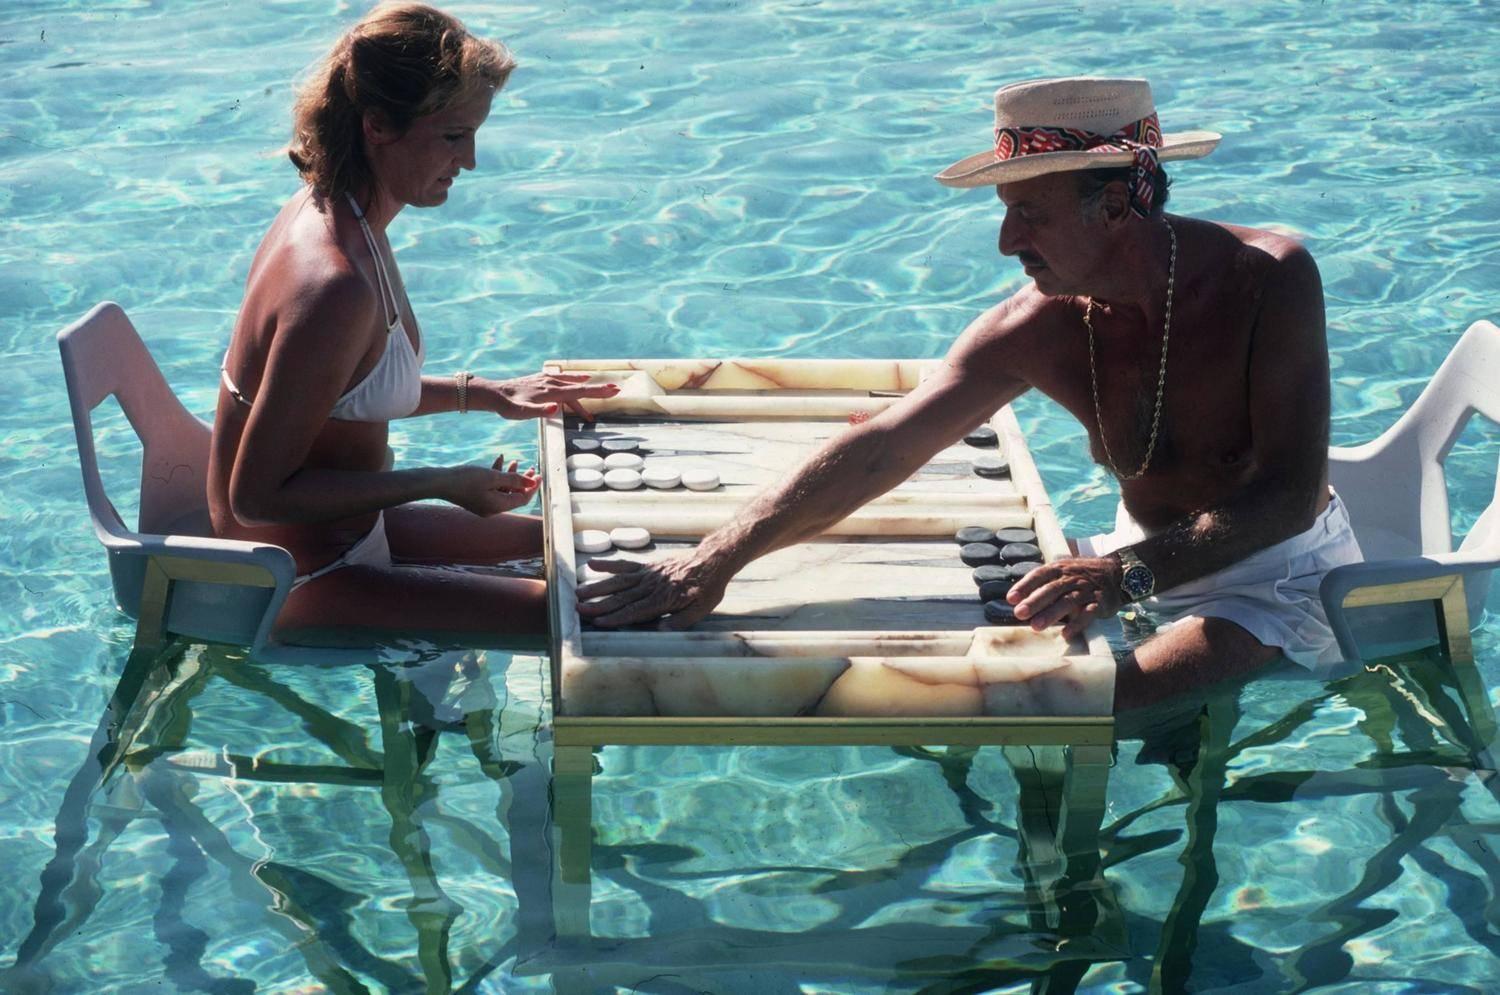 Keep Your Cool (Backgammon in Acapulco), édition de succession